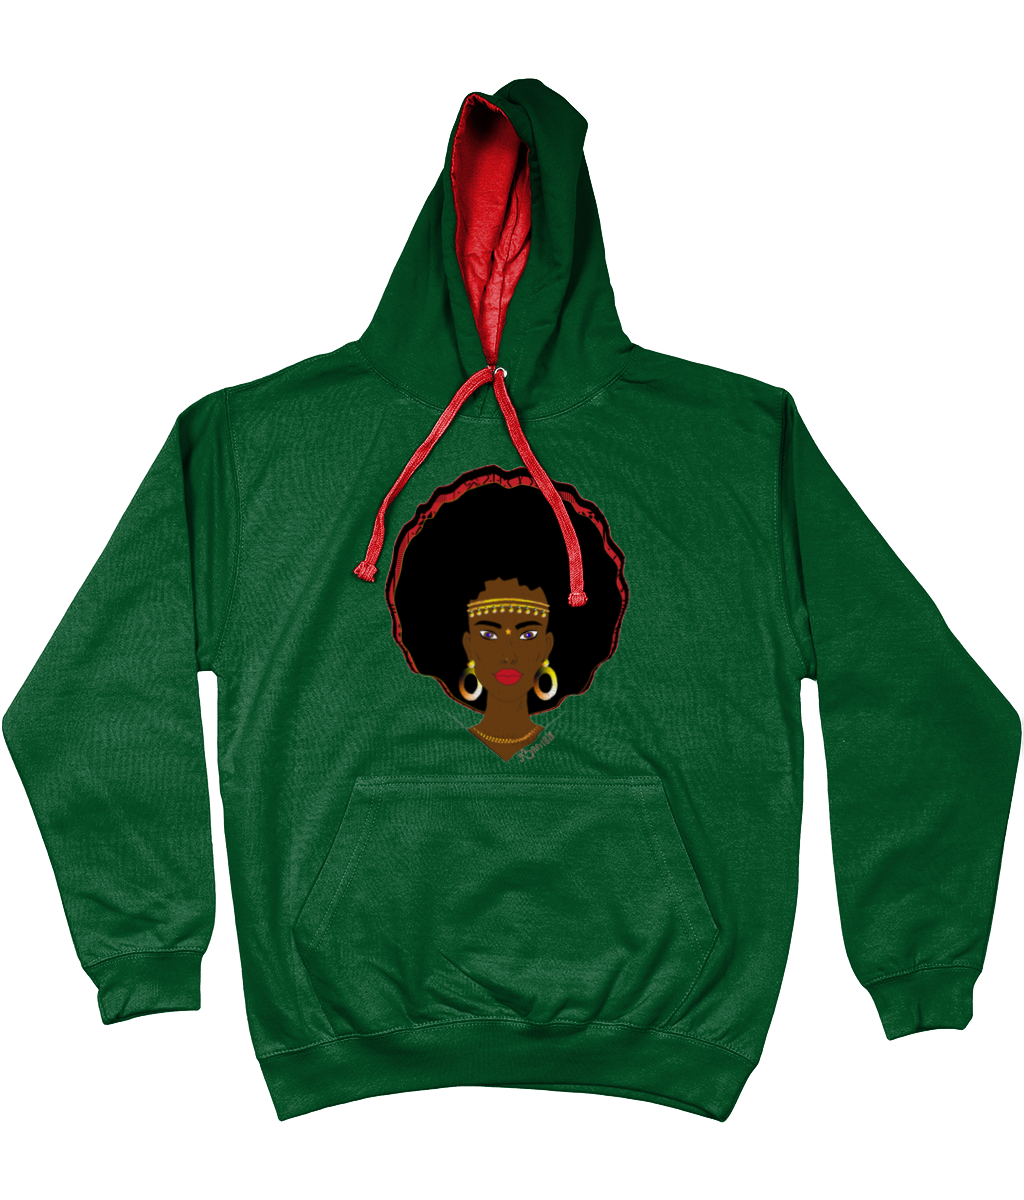 AfriBix Warrior Unisex Hoodie with a contrast hood and string